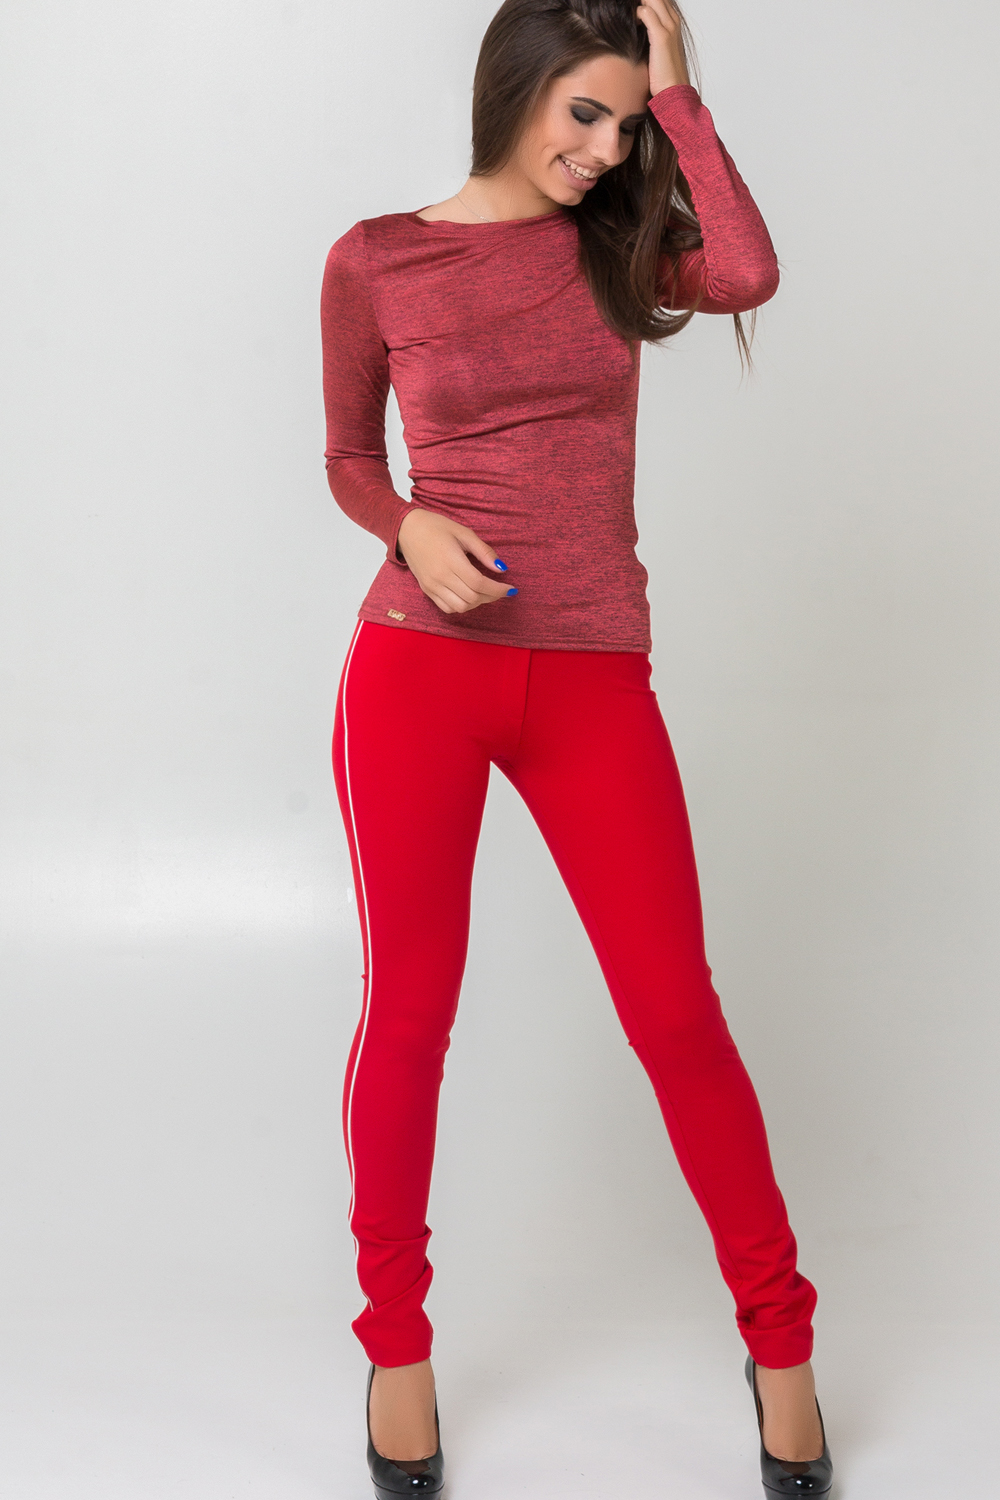 Red leggings with stripes